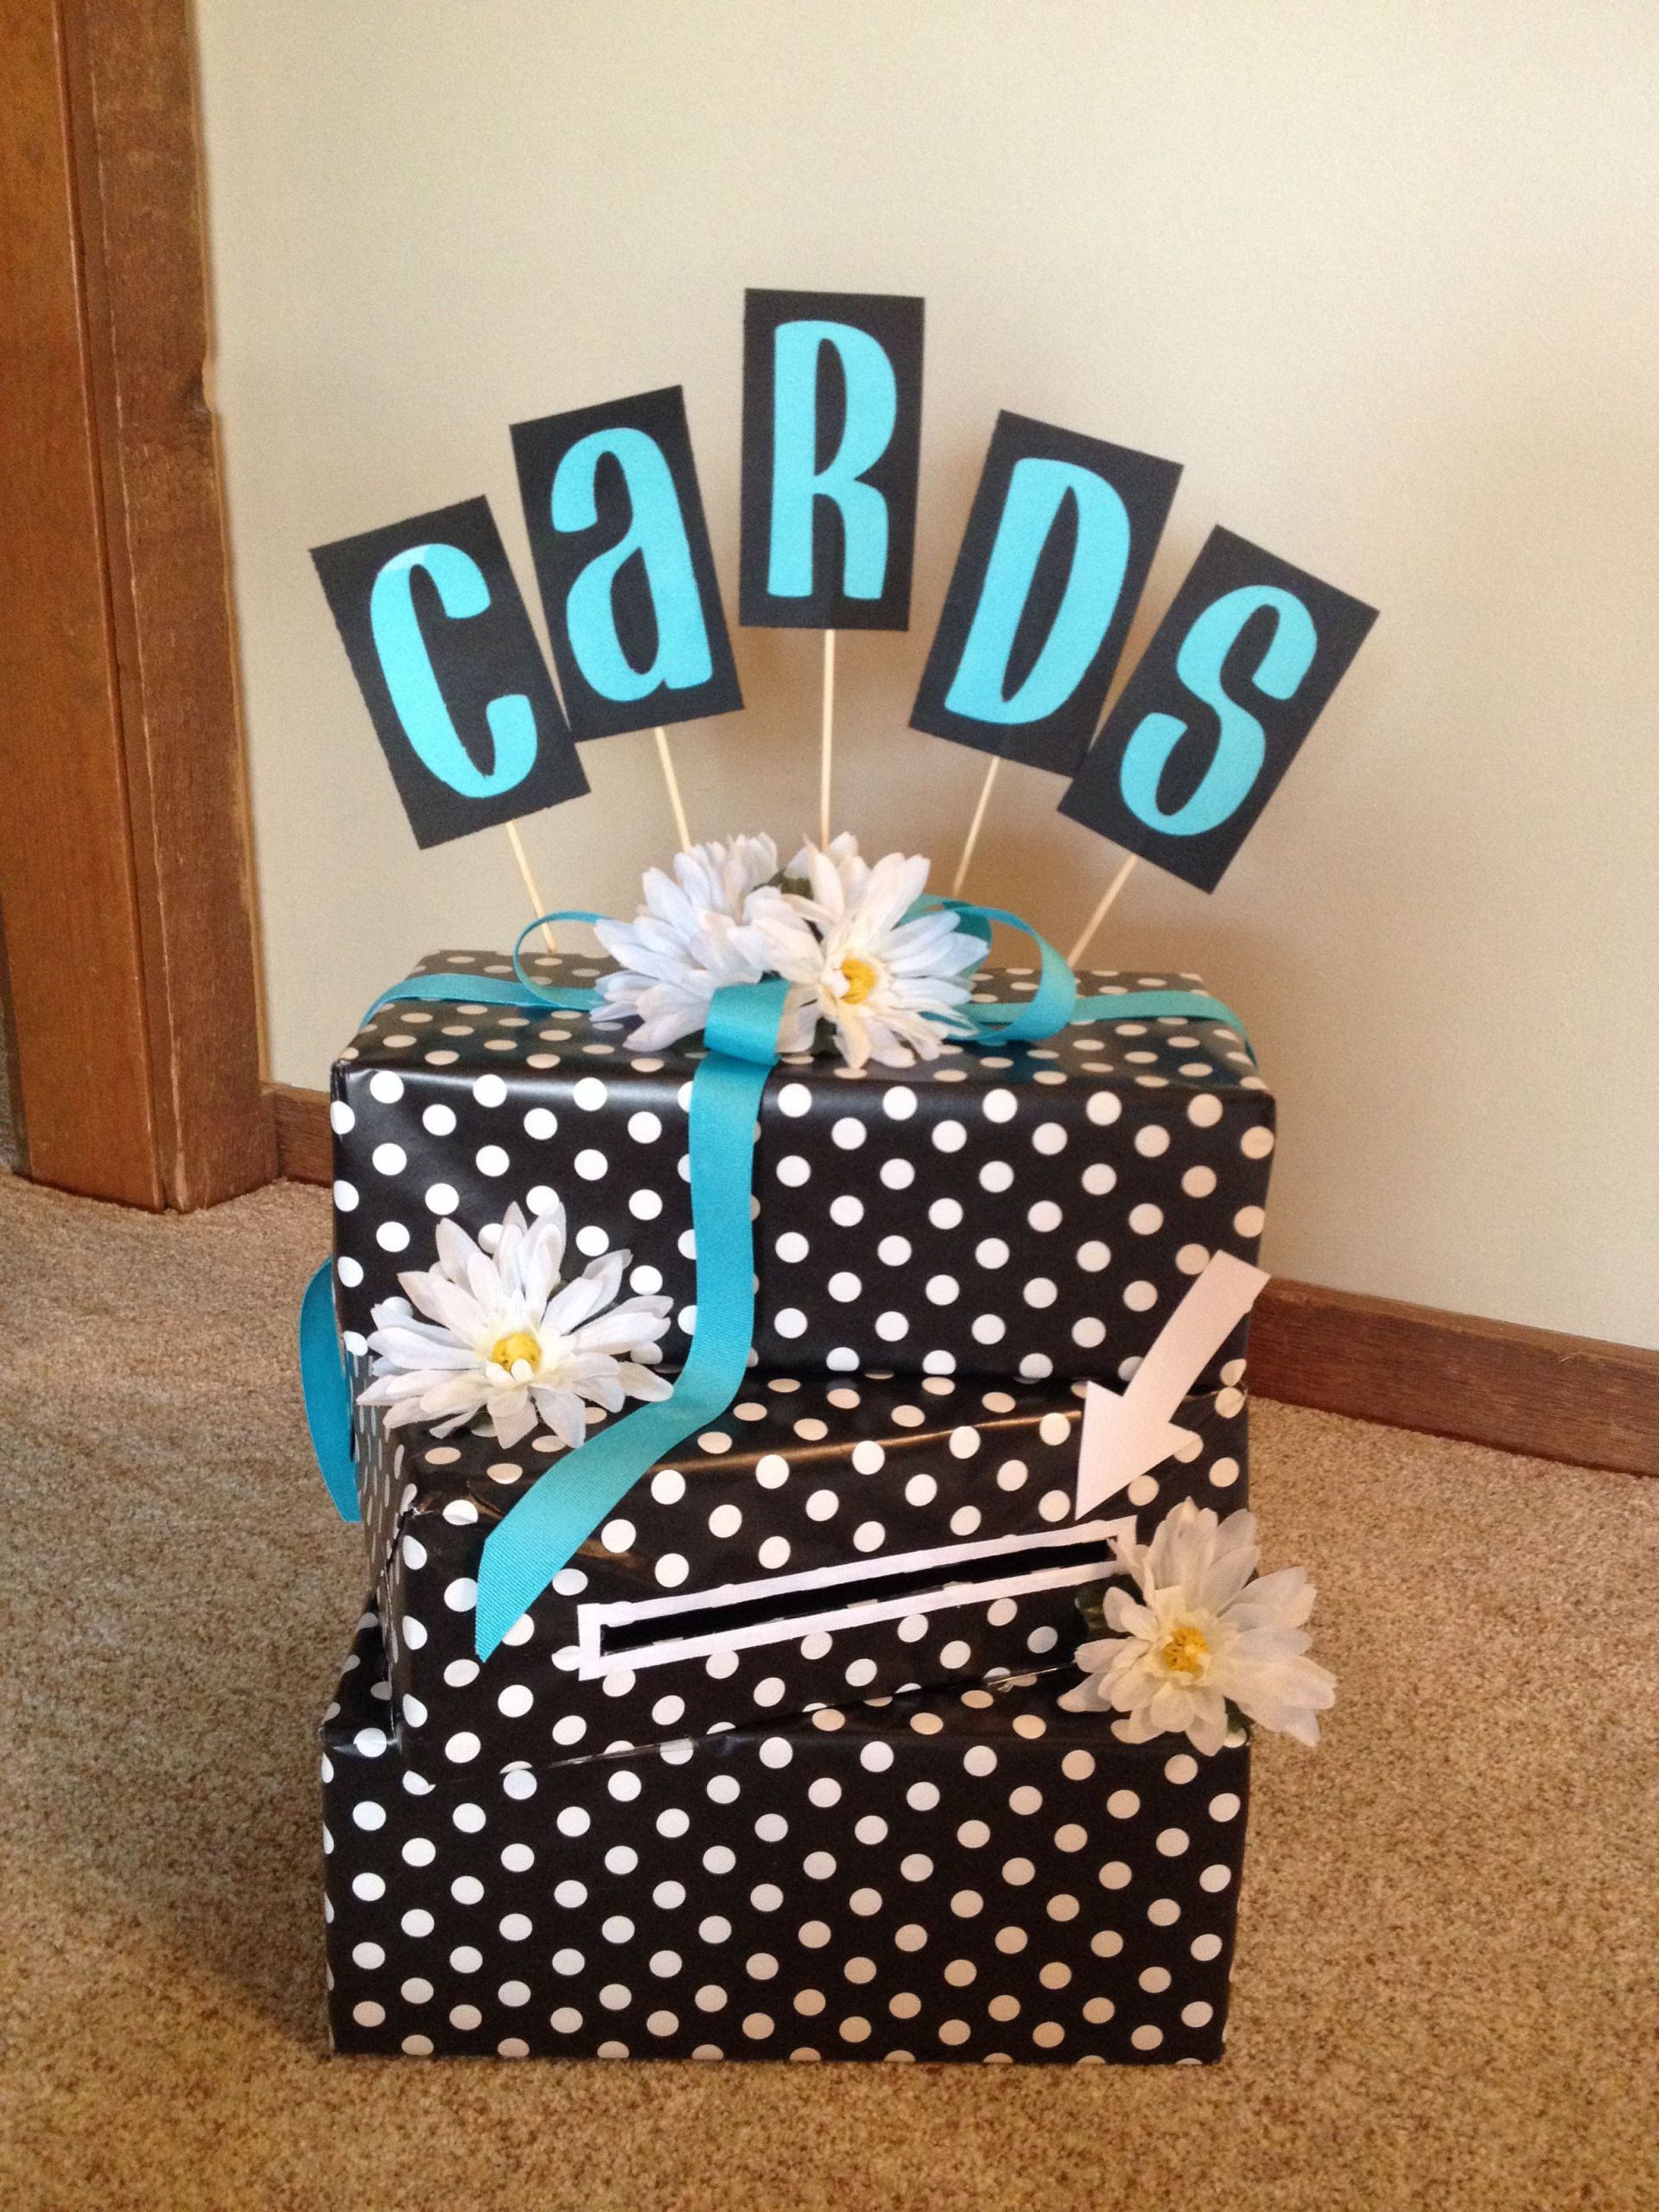 Graduation Open House Party Ideas
 I made this for my daughters graduation open house and she